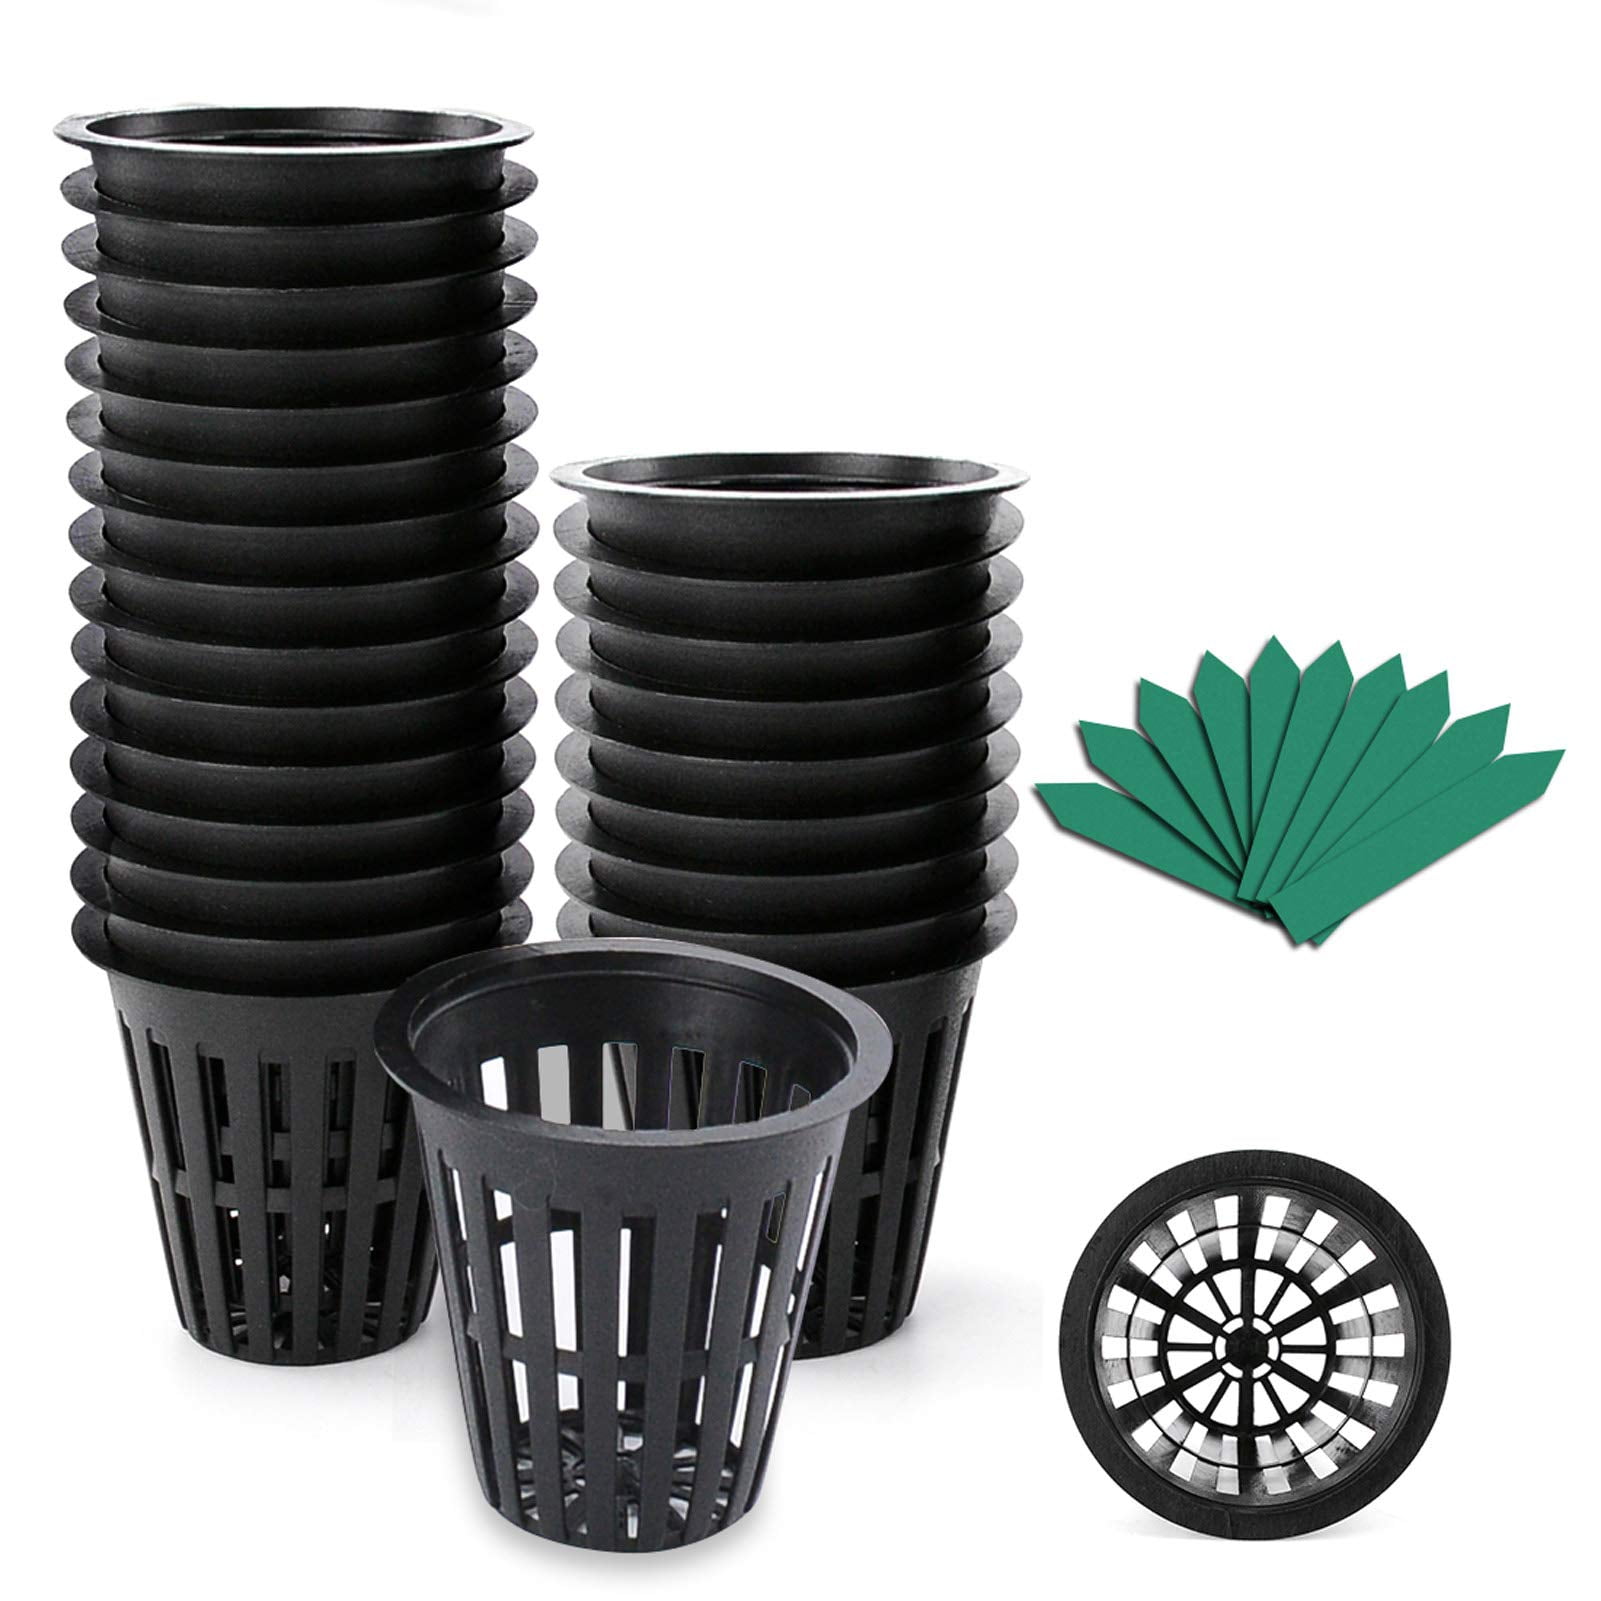 100 2" INCH NET CUP POTS HYDROPONIC SYSTEM GROW KIT 